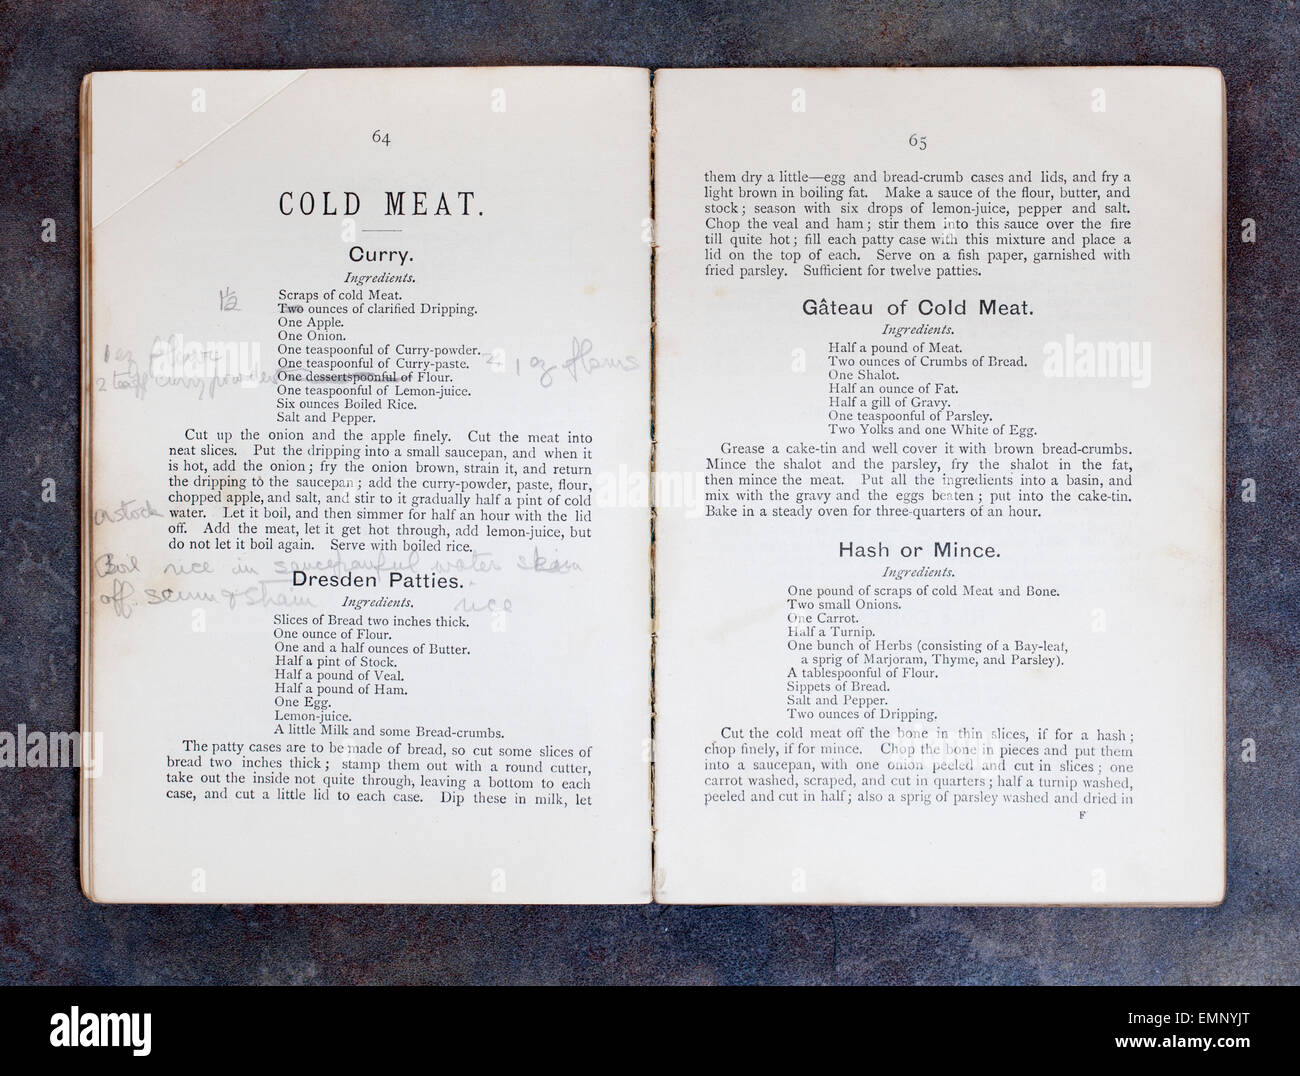 Cold Meat Chapter - Plain Cookery Recipes - The Official Handbook of The National Training School of Cookery Stock Photo